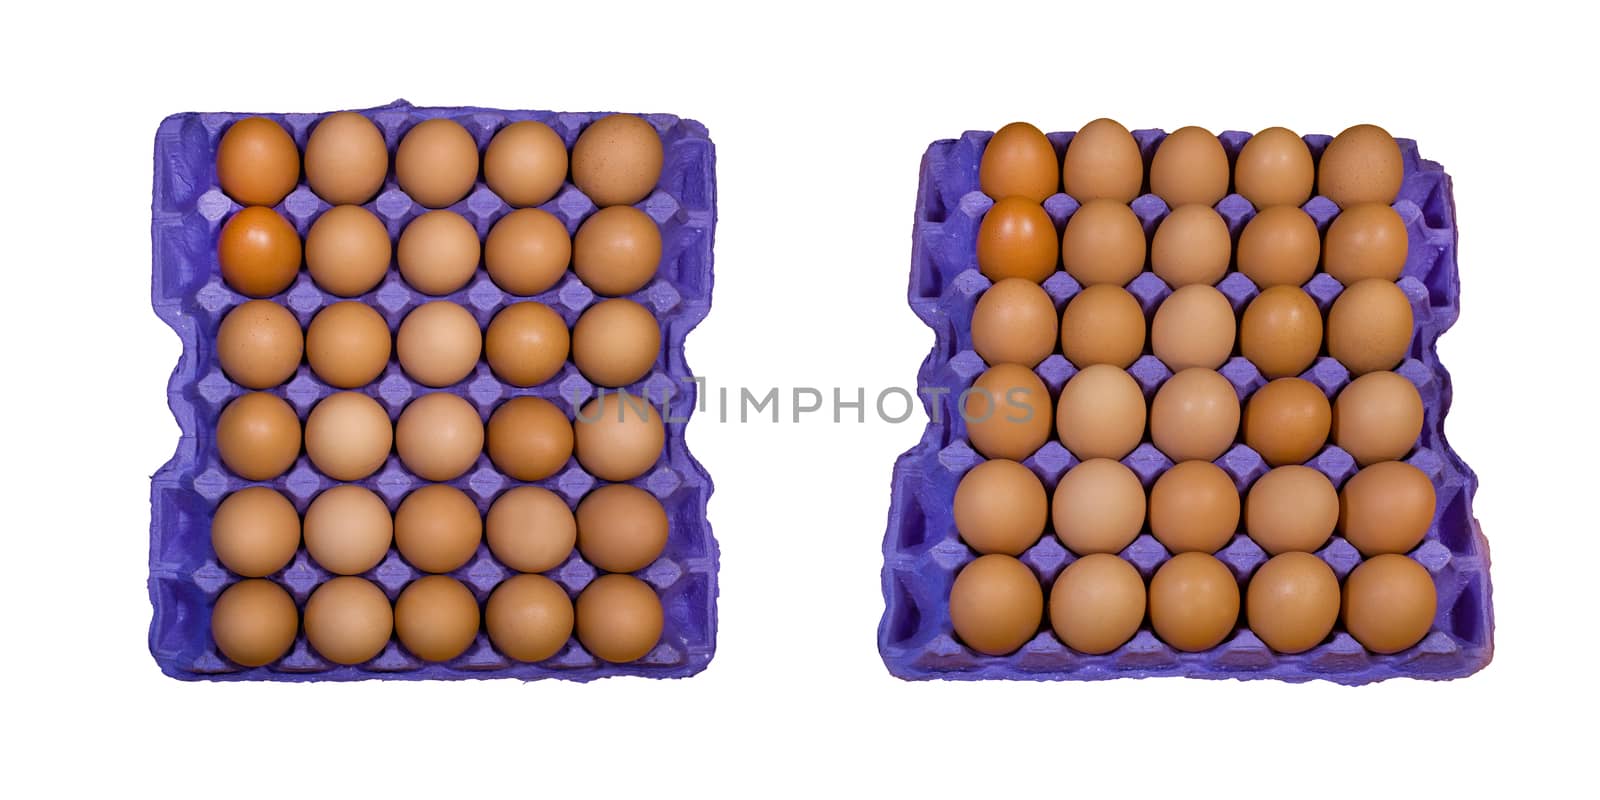 Eggs with orange shell in blue cardboard tray